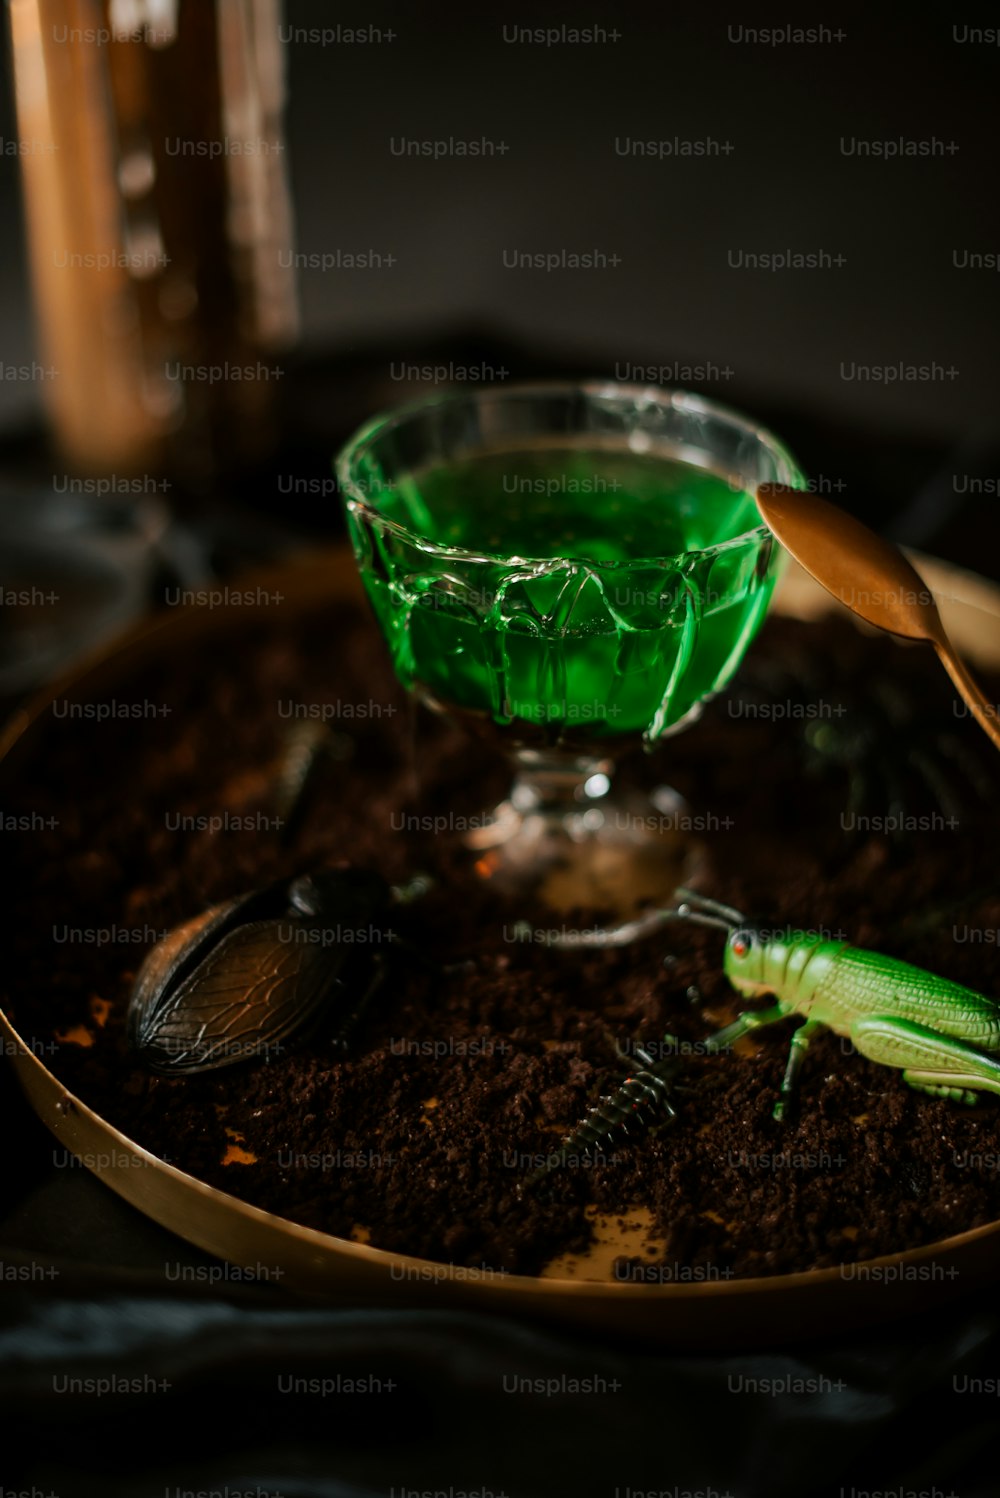 a glass bowl with a green liquid in it